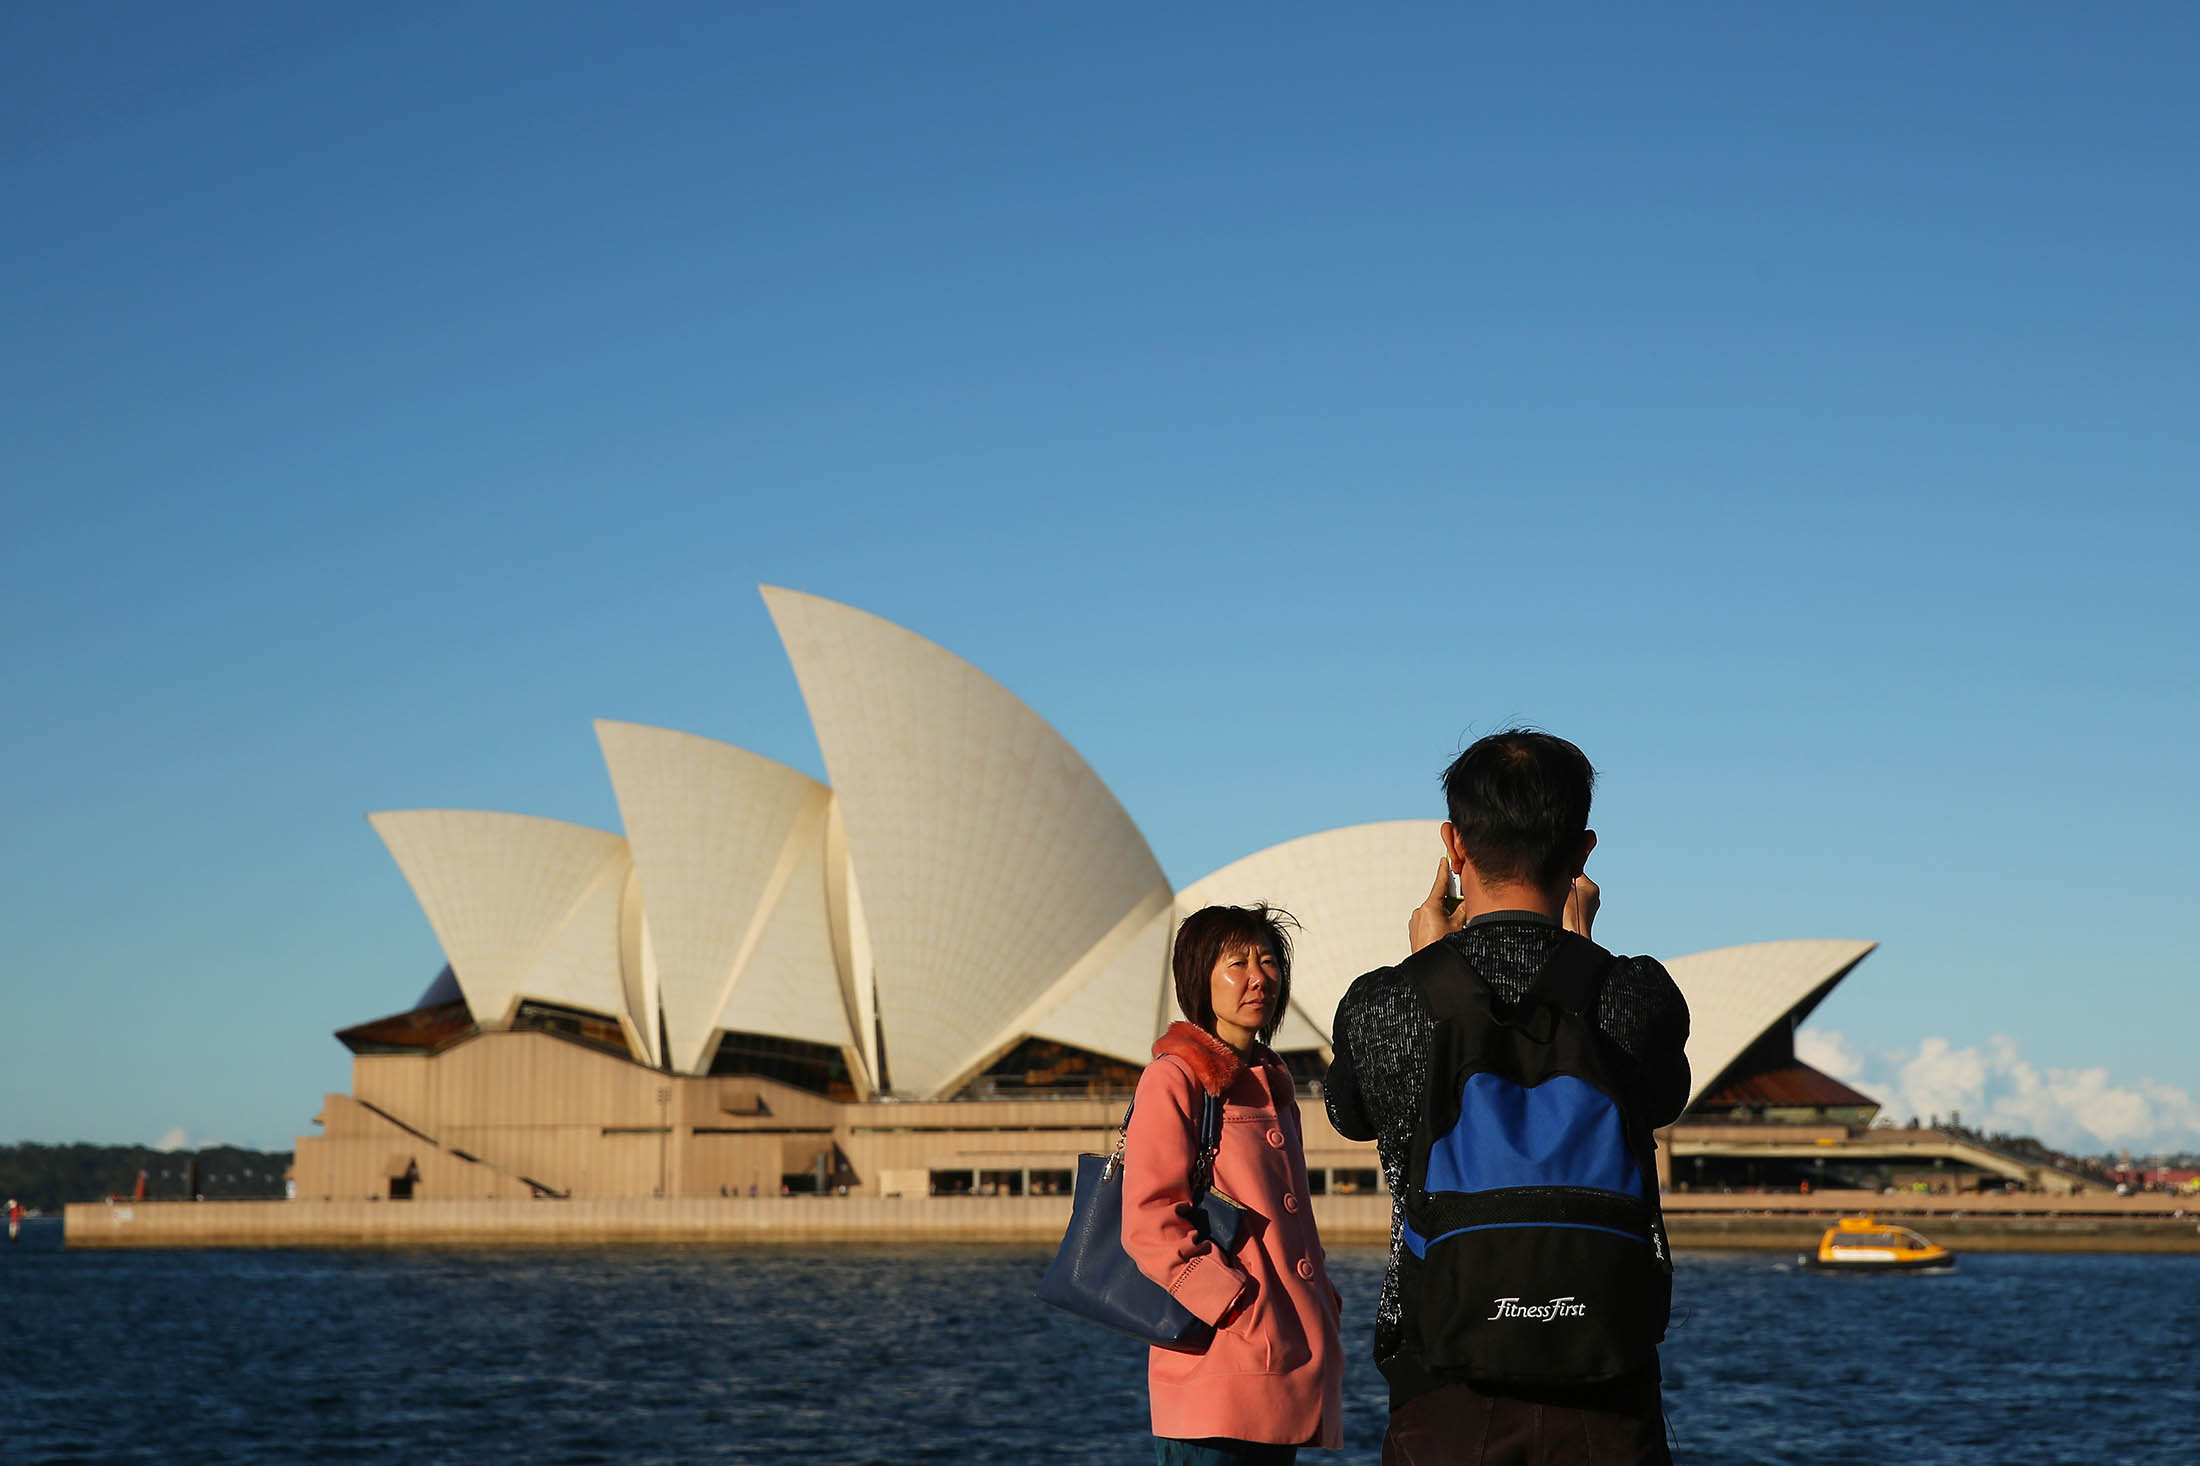 A tourist poses for photographs in front of the Sydney Opera House.
